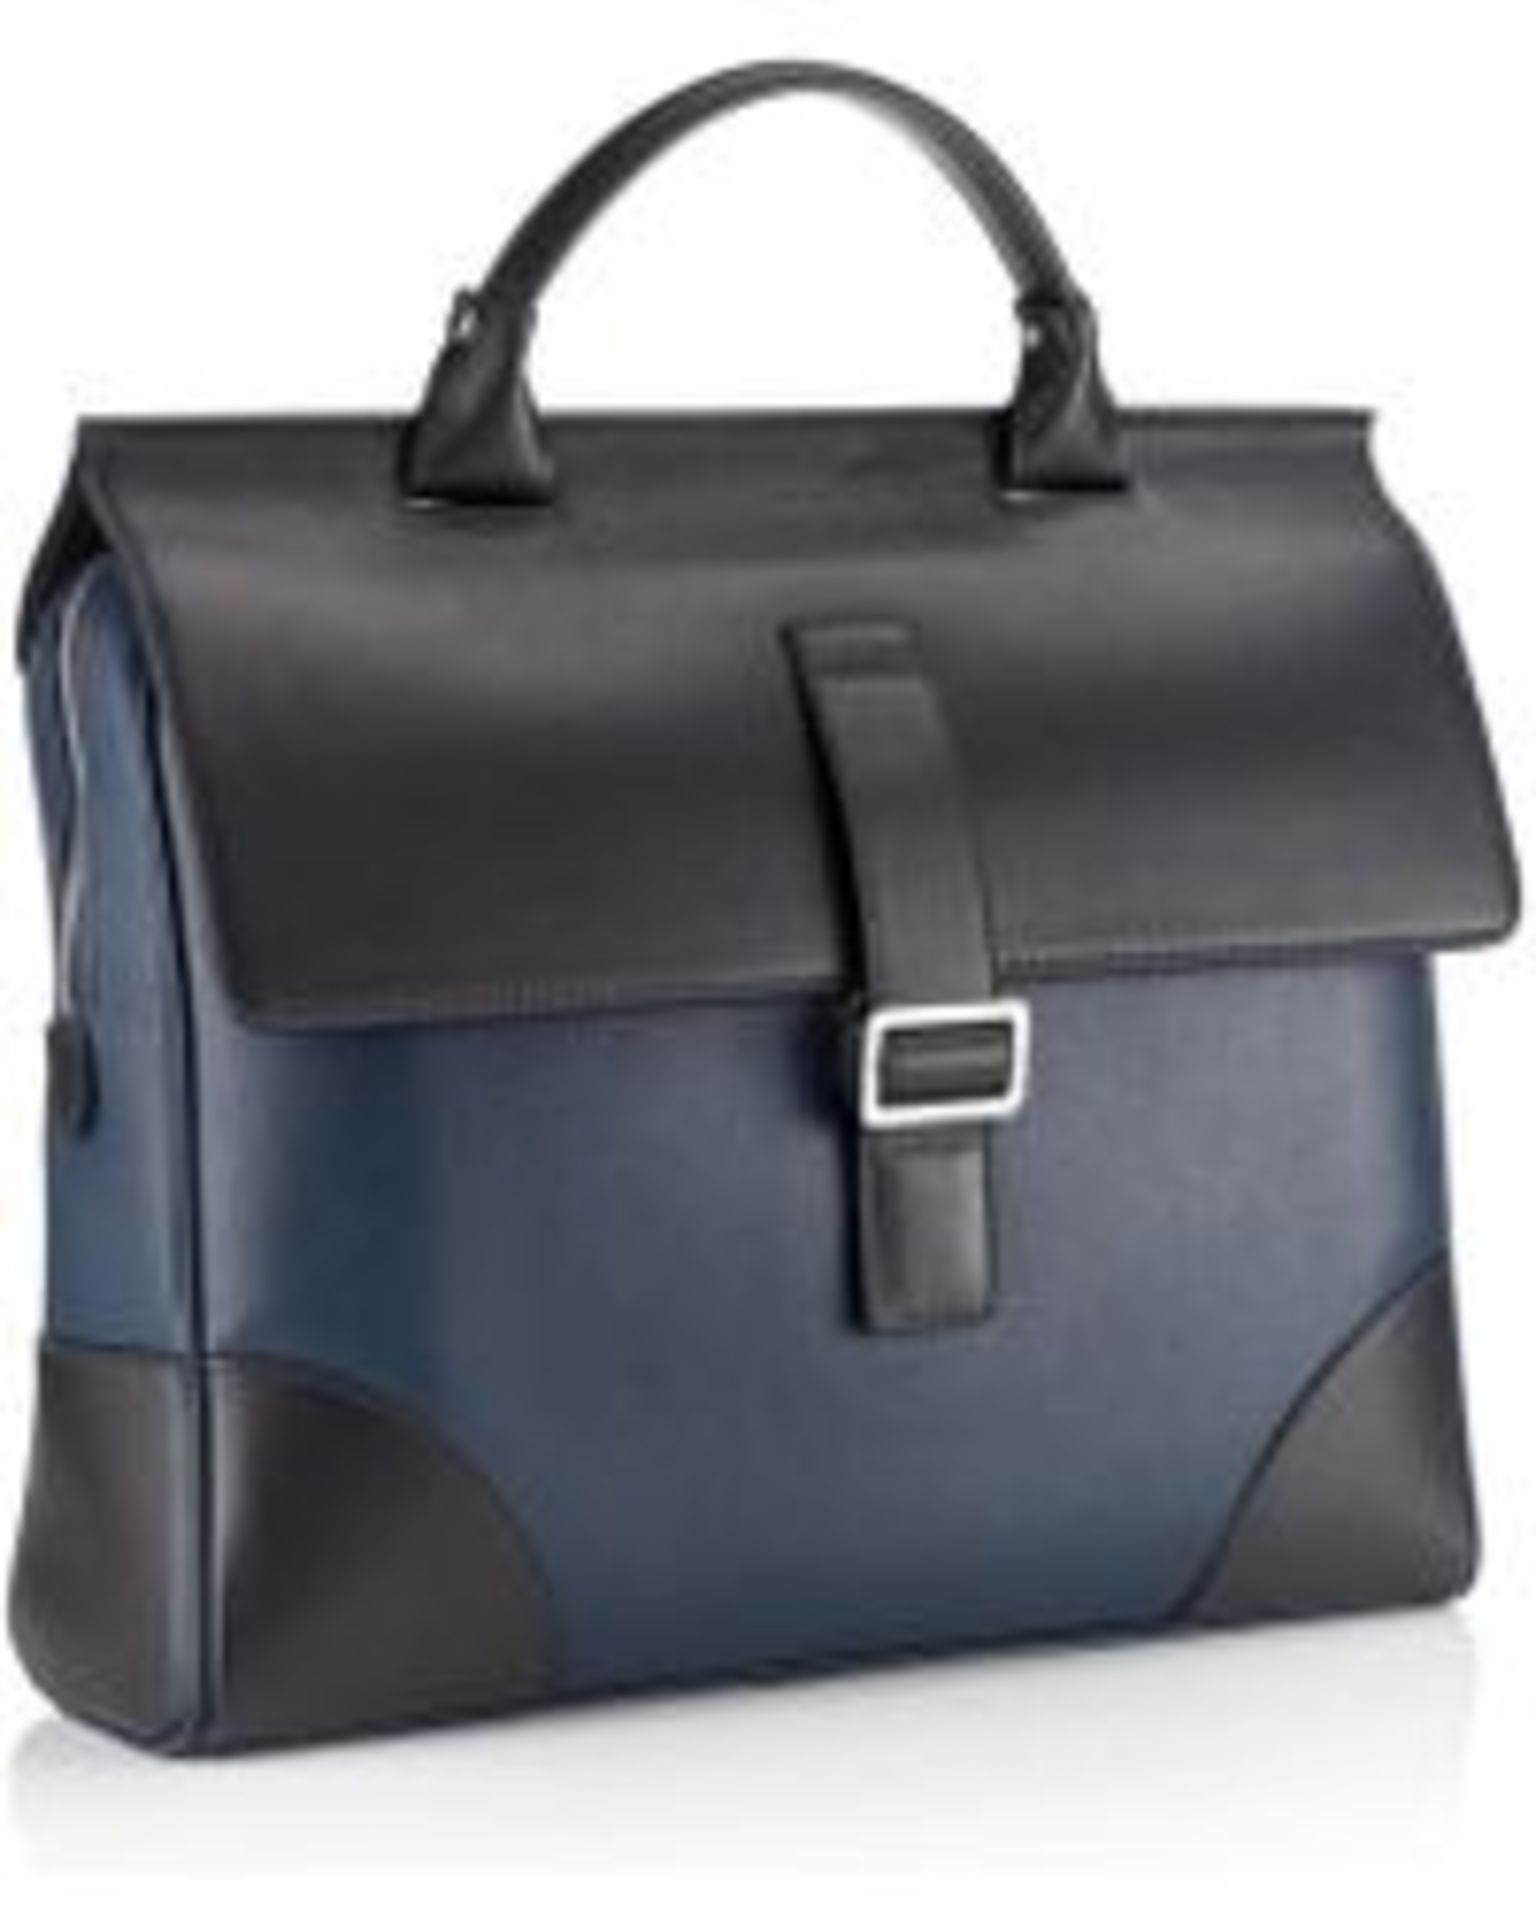 Mark Giusti Milano Nappa Leather Briefcase This Briefcase Is Made To Carry Your Laptop First And